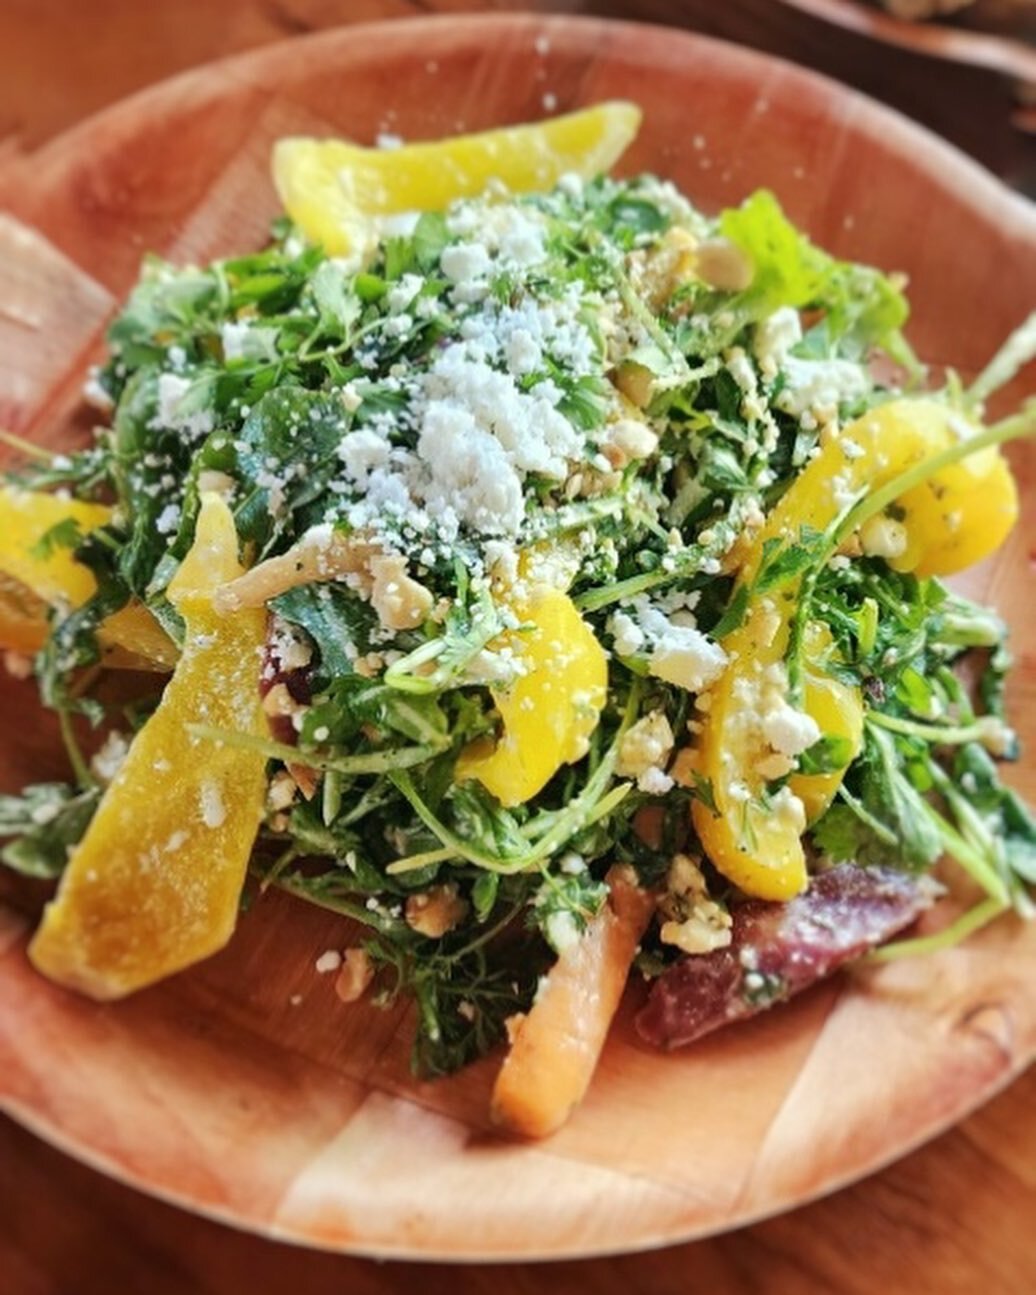 The yellow bell (pepper) is ringing in my ears so I had to make a salad. Buttermilk marinated bell peppers and arugula steal the show, with peanuts and goat feta rounding it all together. Also, to celebrate pepper season creeping in, an EXTRA spicy h